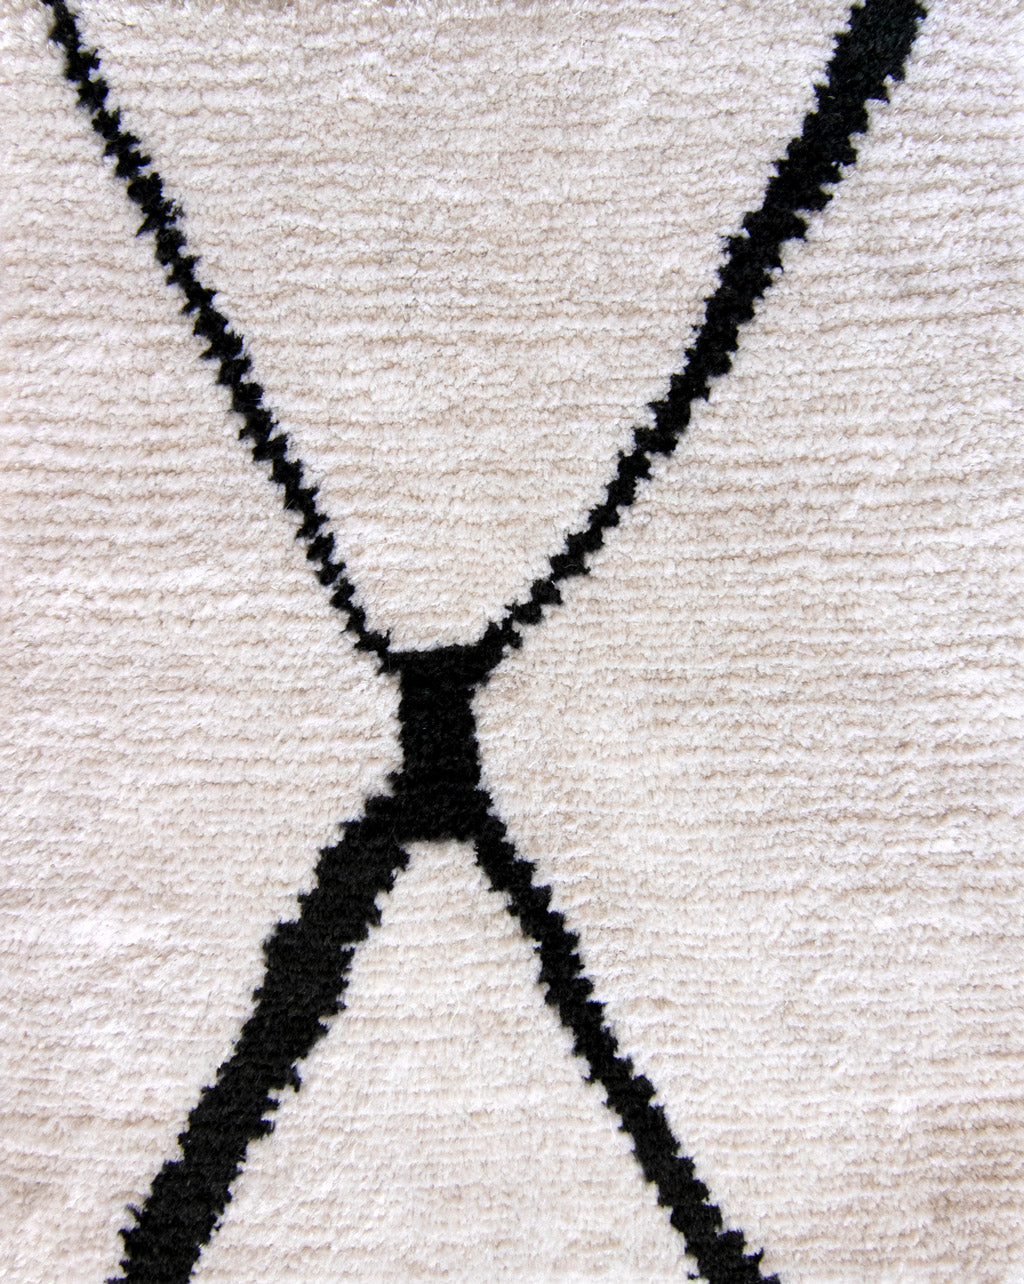 A Large Peaks Hand Knotted Rug Black And White with dynamic black lines in a black and white design